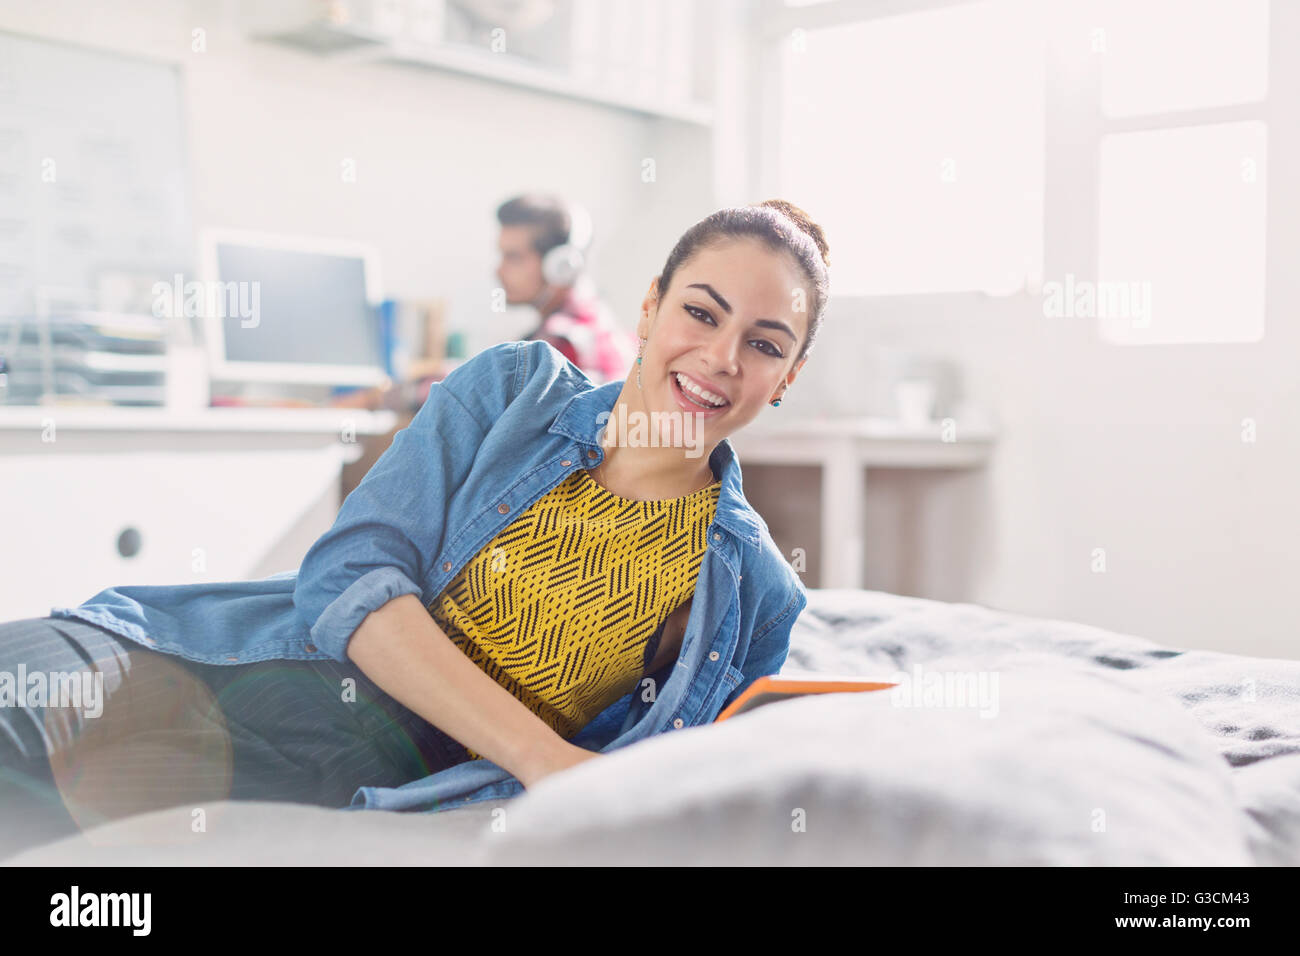 Portrait of smiling young adult woman reading on bed Banque D'Images